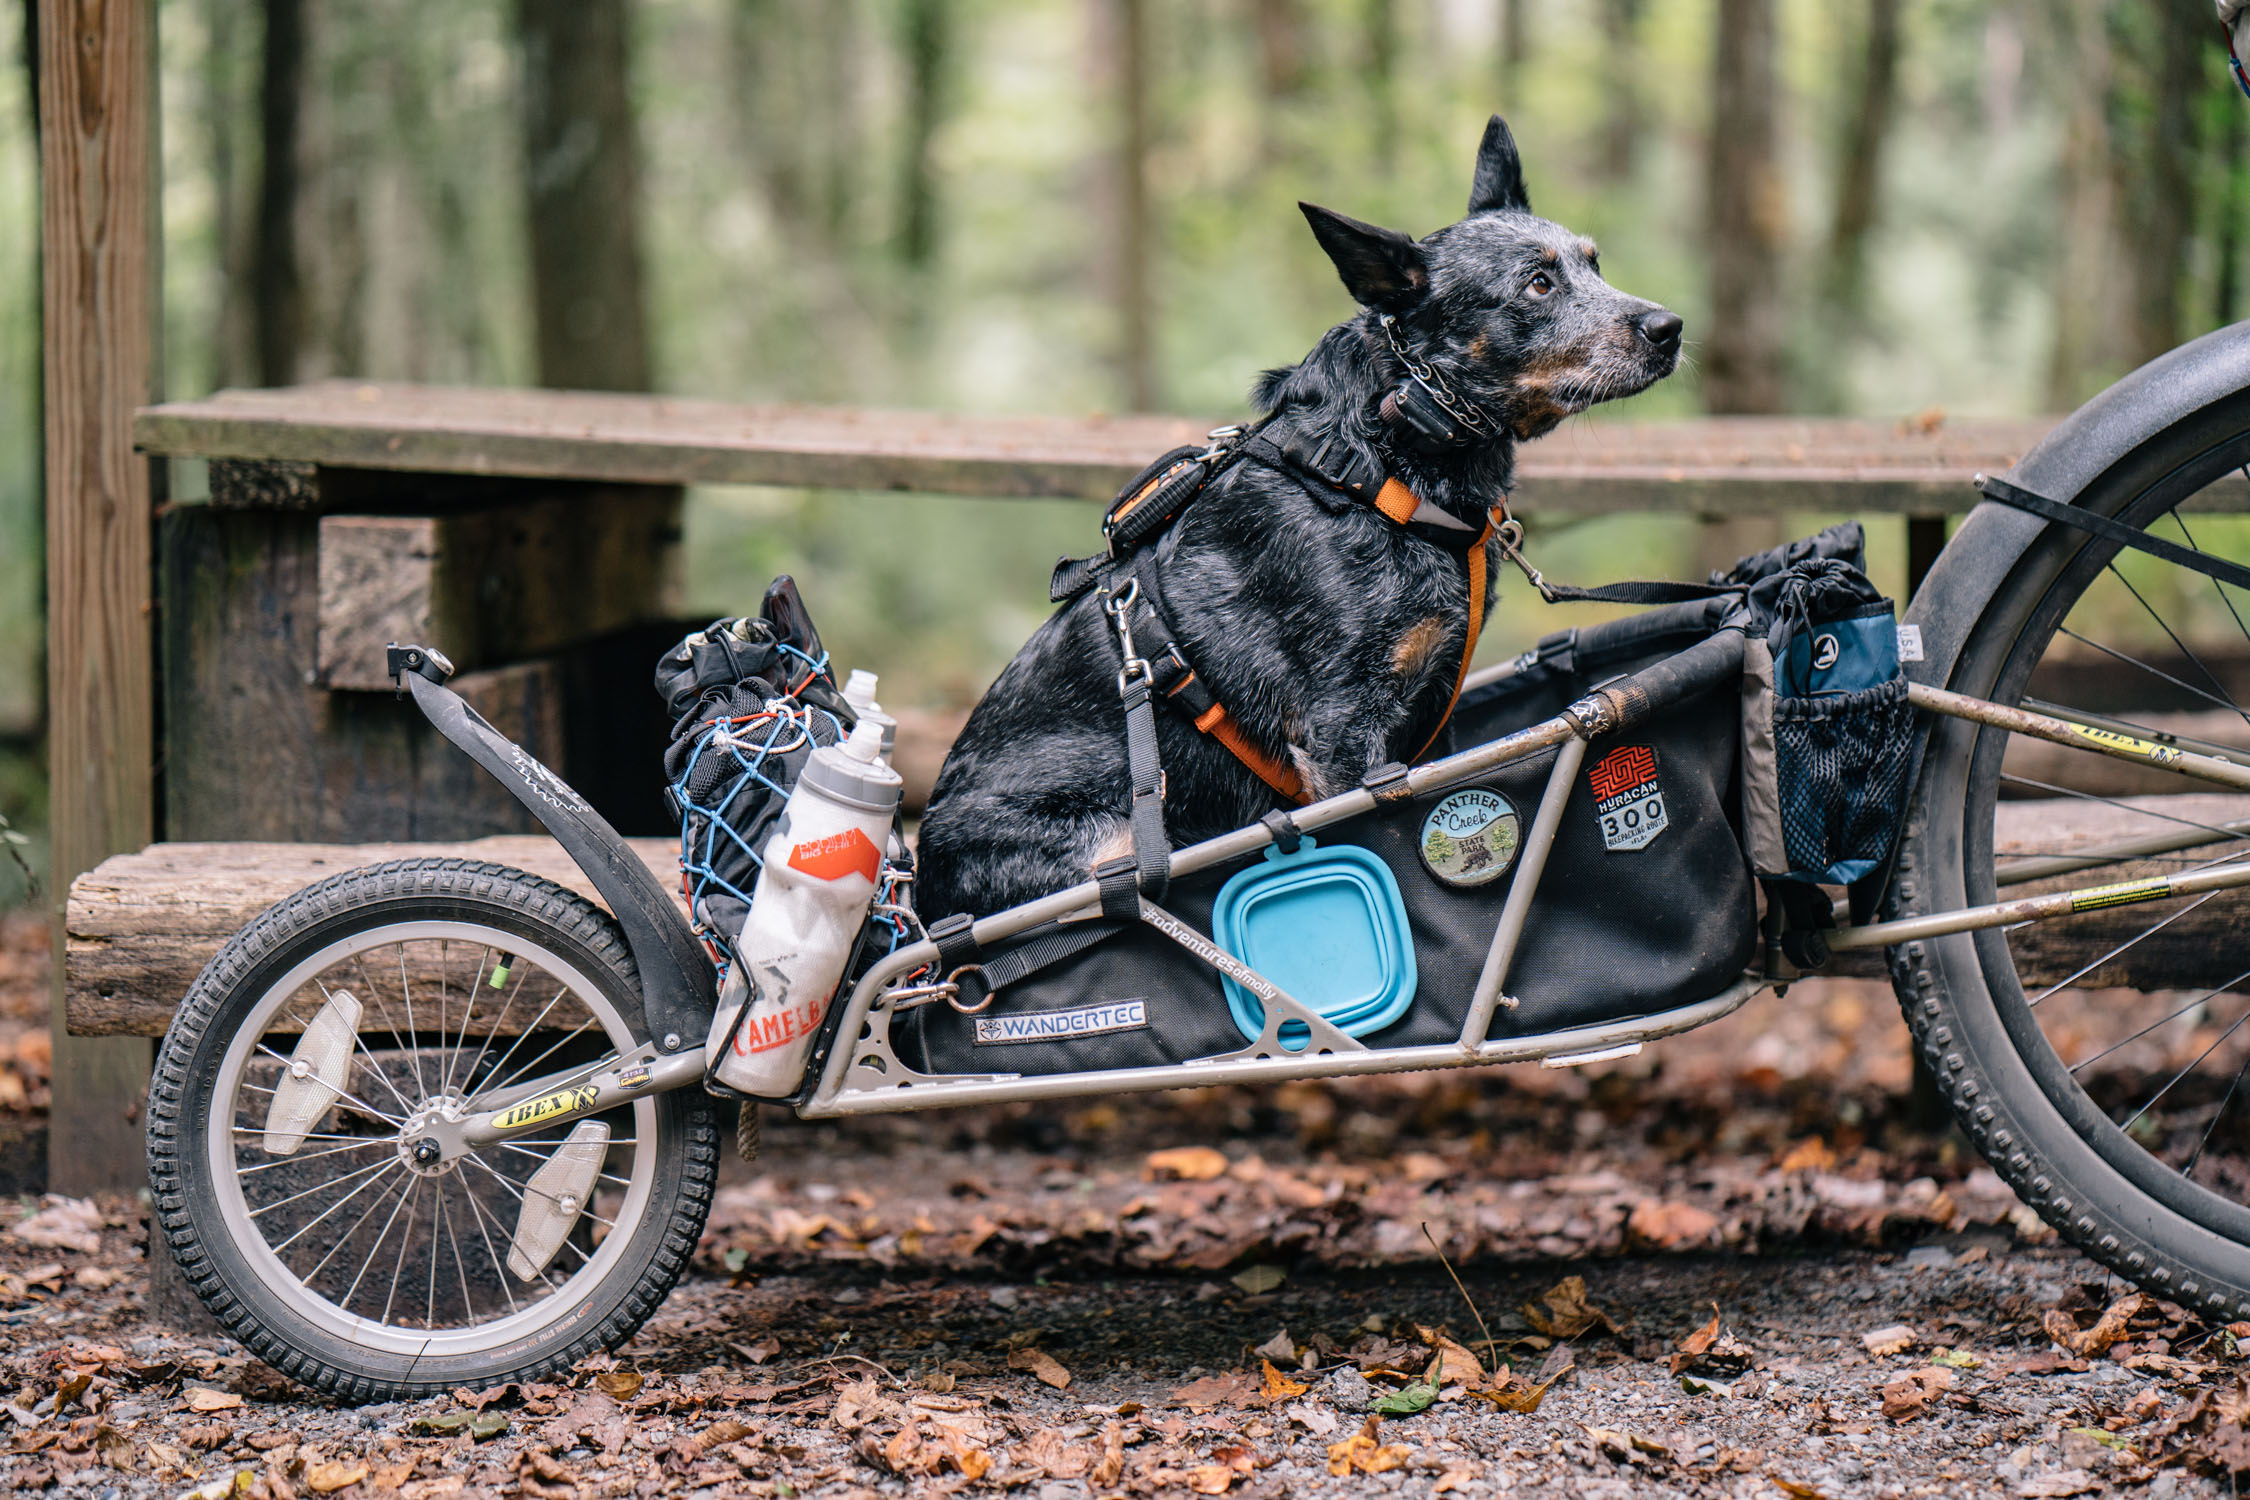 Bike Buggy For Dogs - Diy Bike Trailer For Dogs